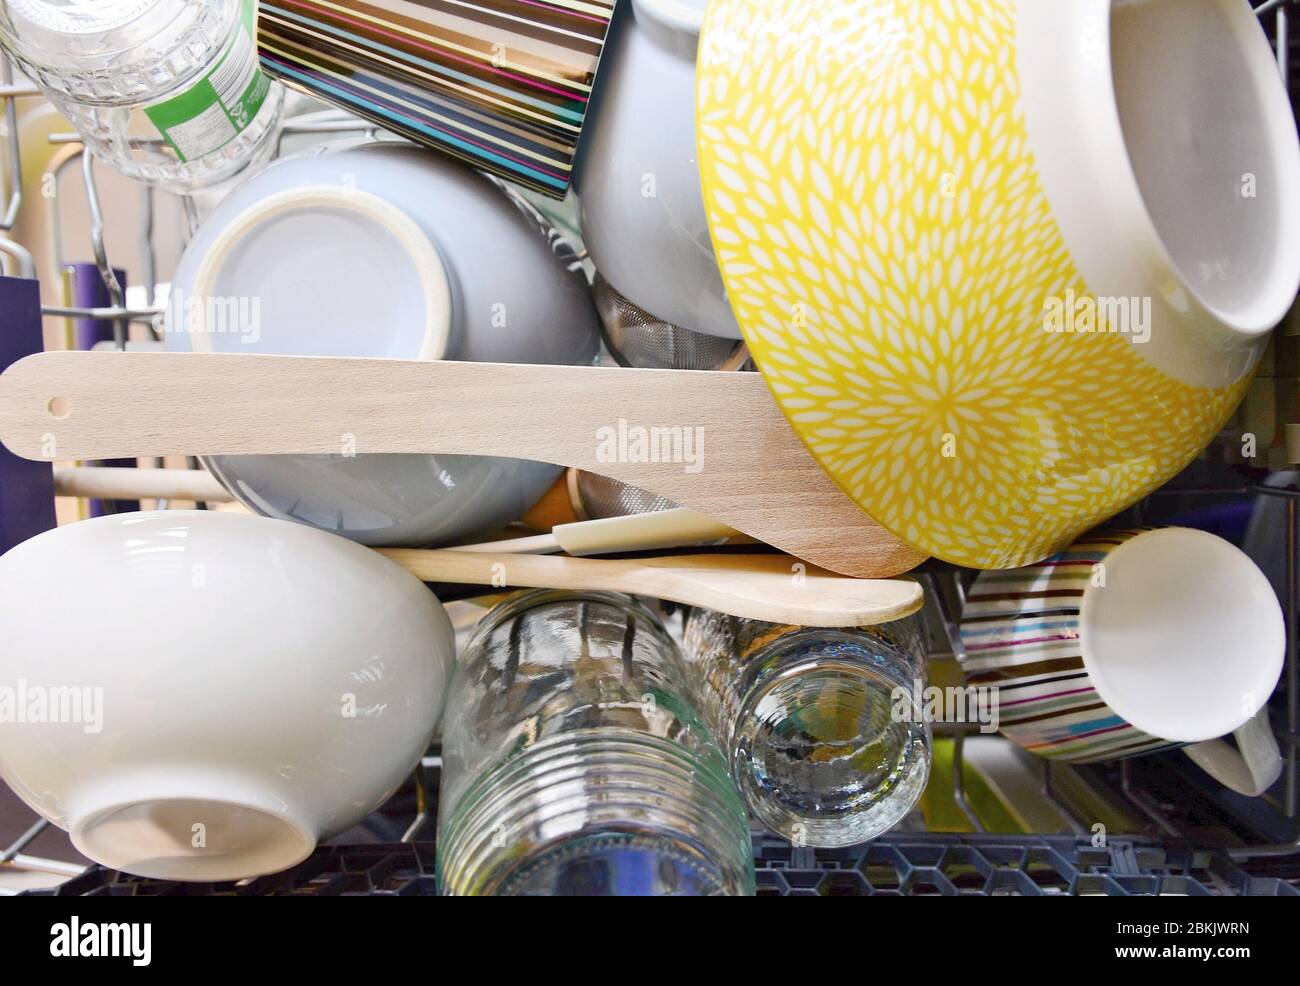 Top view of cleaned different dishes in dishwasher rack. Stock Photo